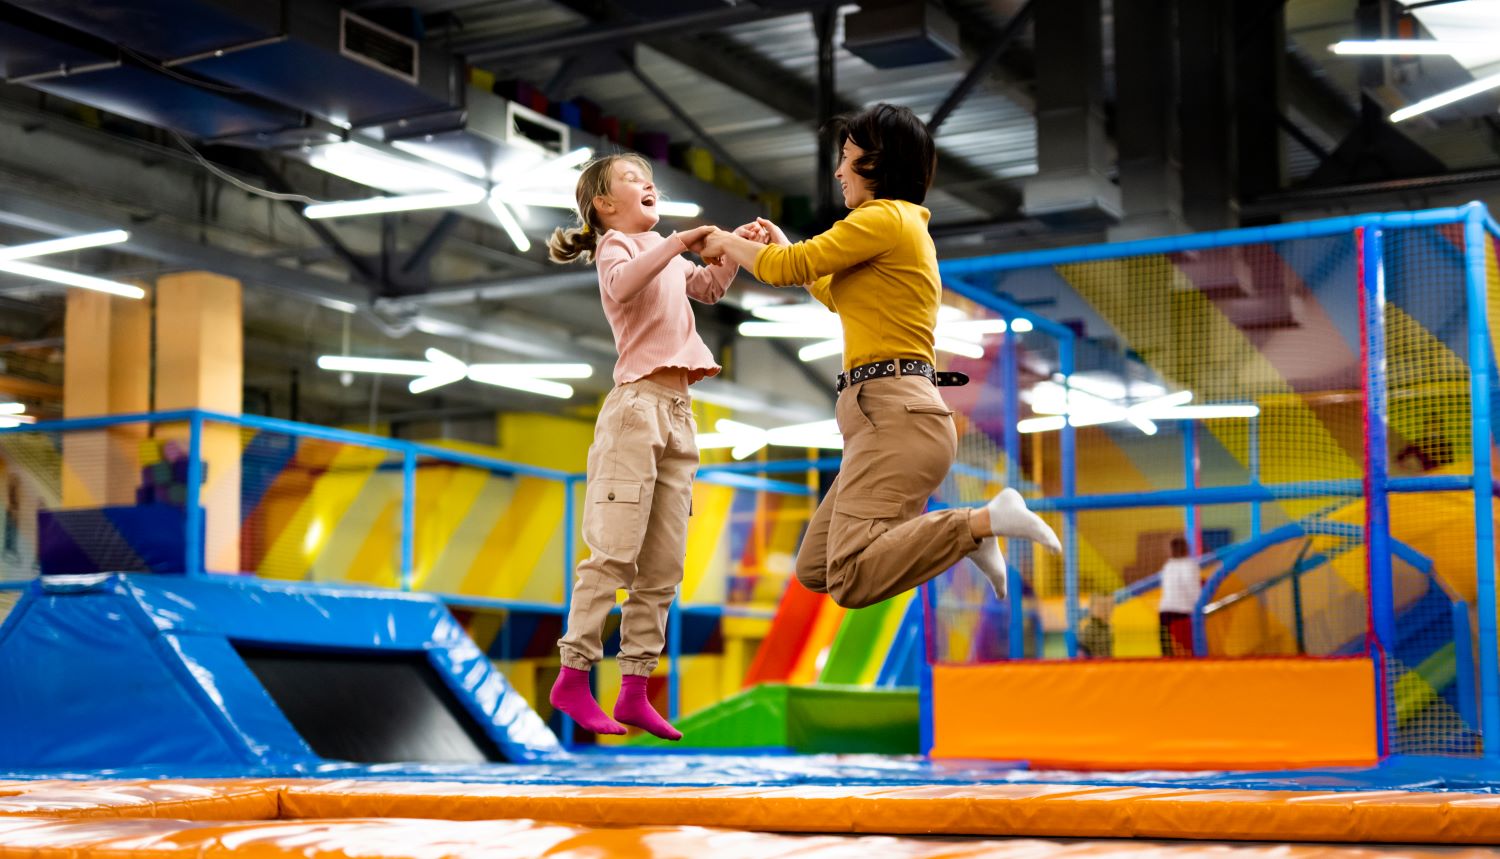 Indoor Children's Activities in Salem, Oregon to Save for a Rainy Day